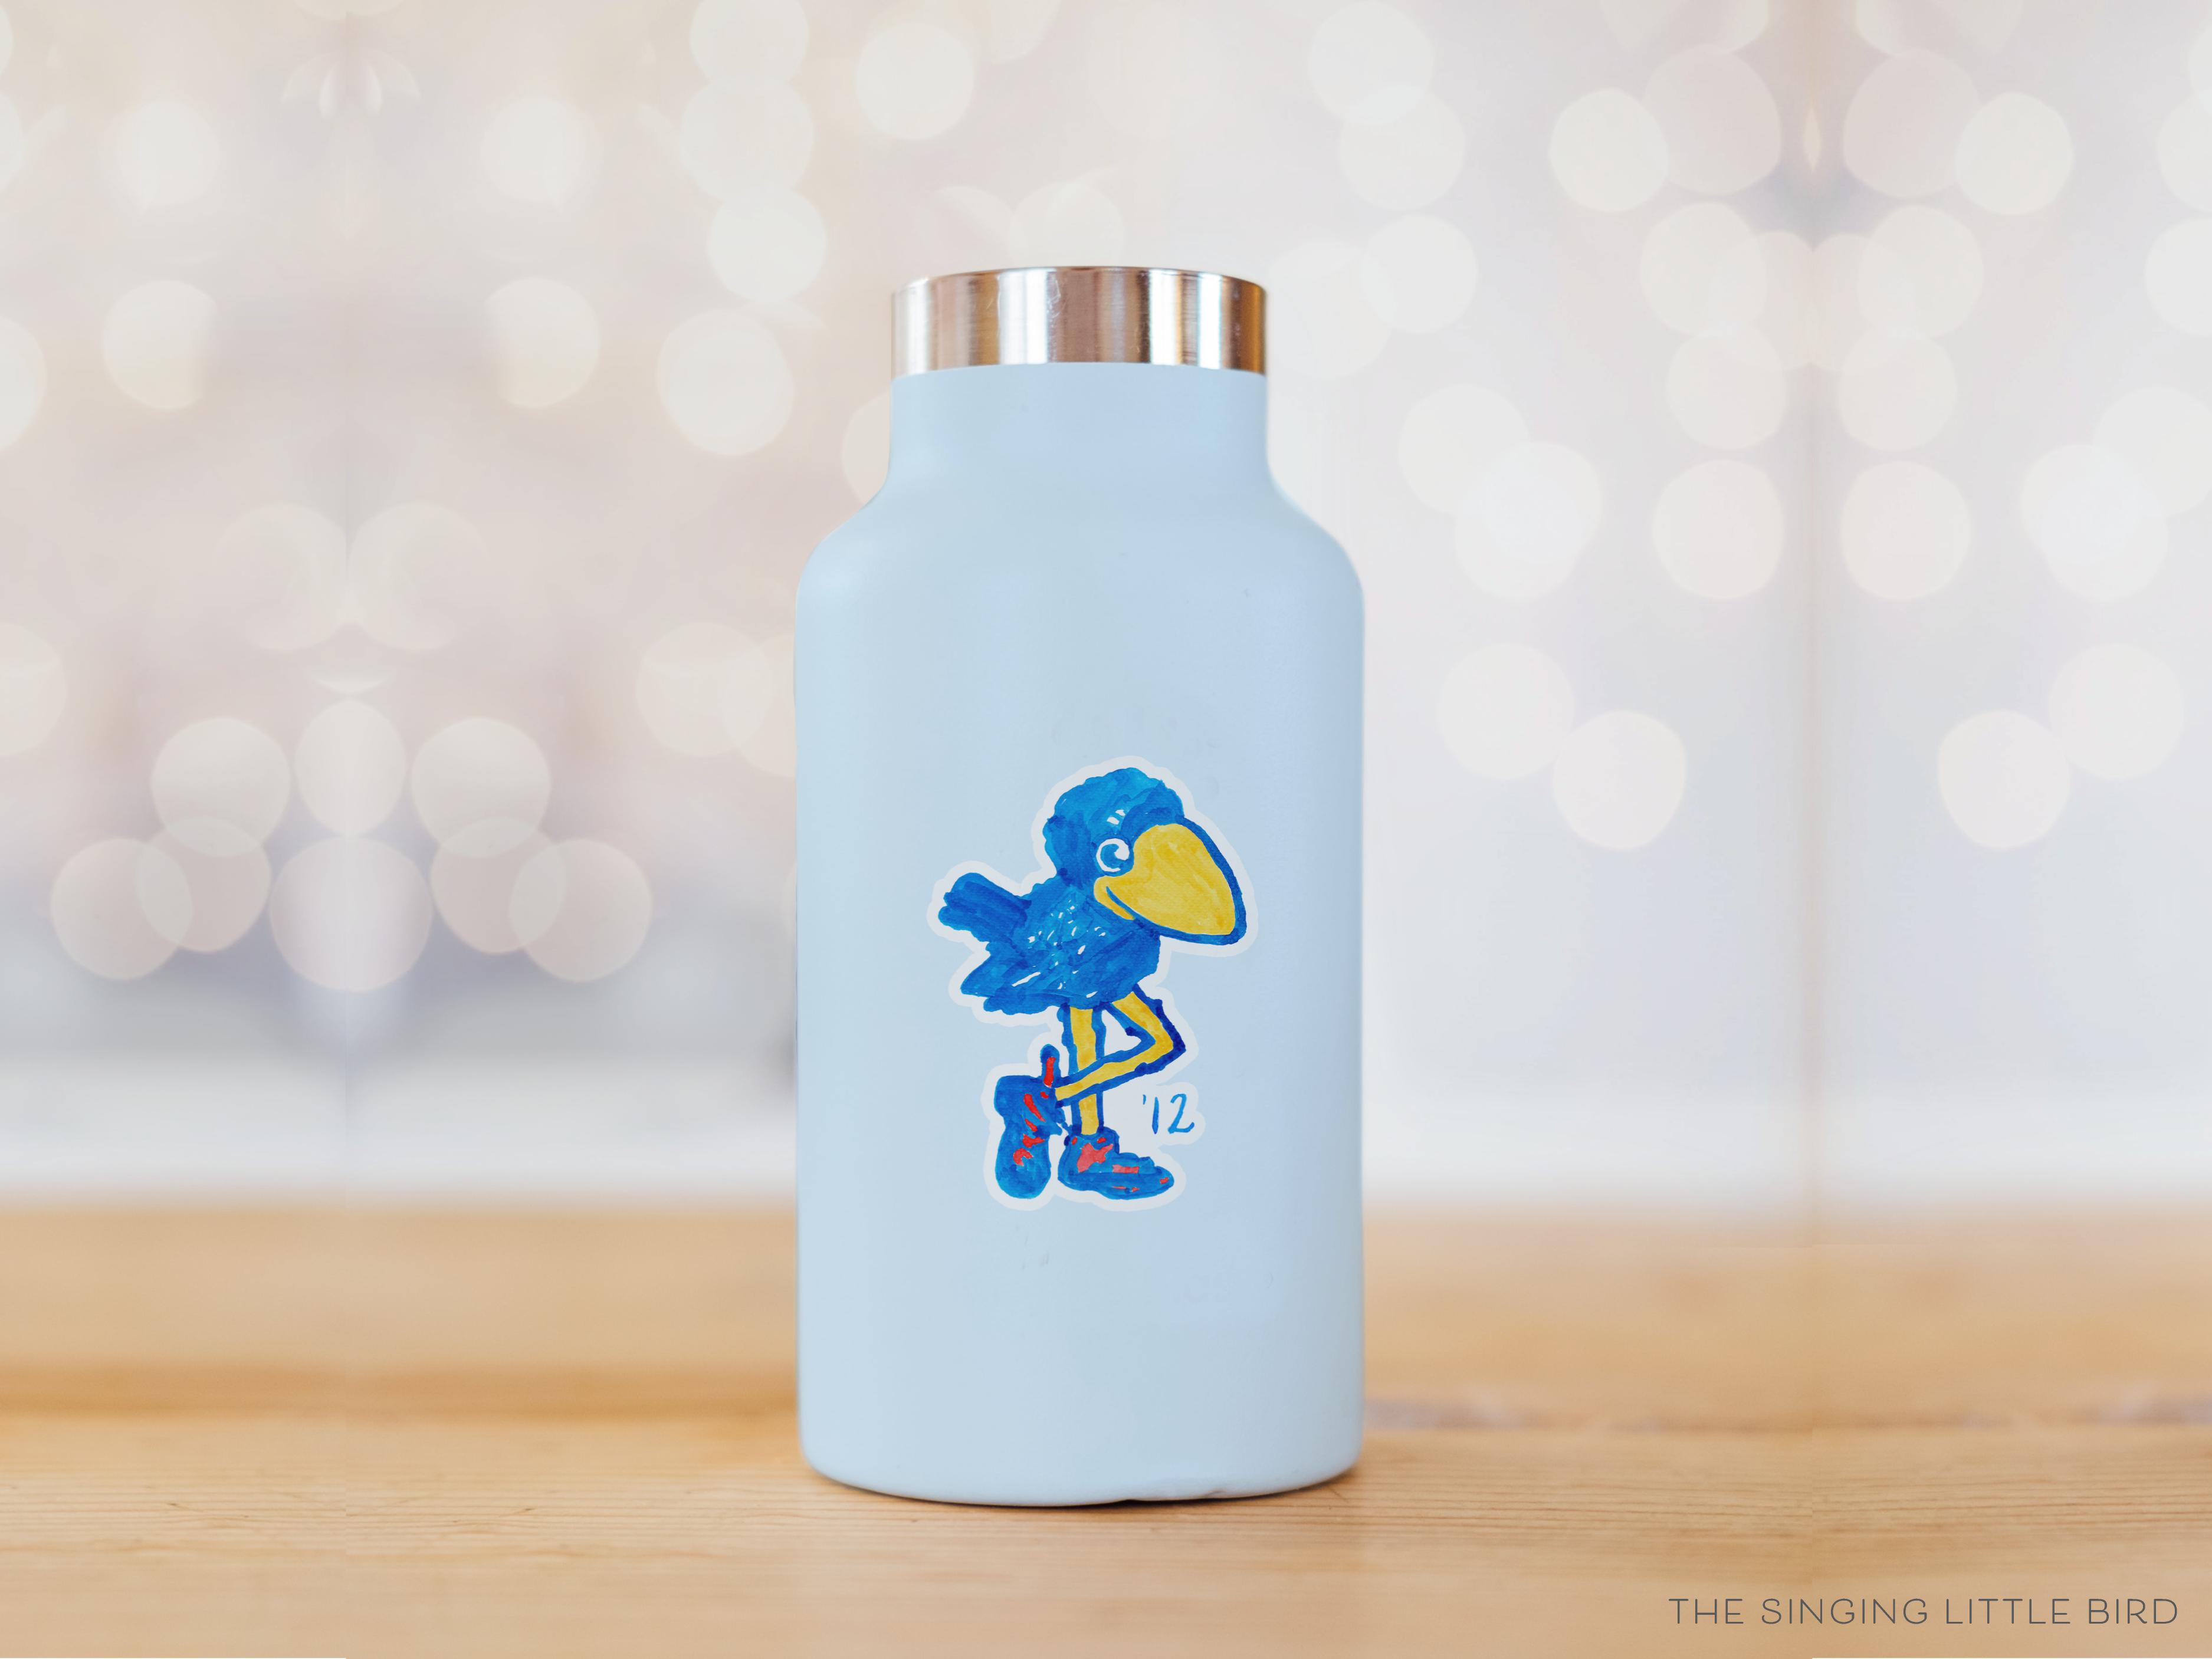 1912 Jayhawk Vinyl Sticker [Officially Licensed]-These weatherproof die cut stickers feature our hand-painted watercolor 1912 Jayhawk, making great laptop or water bottle stickers or gifts for the University of Kansas lover in your life.-The Singing Little Bird